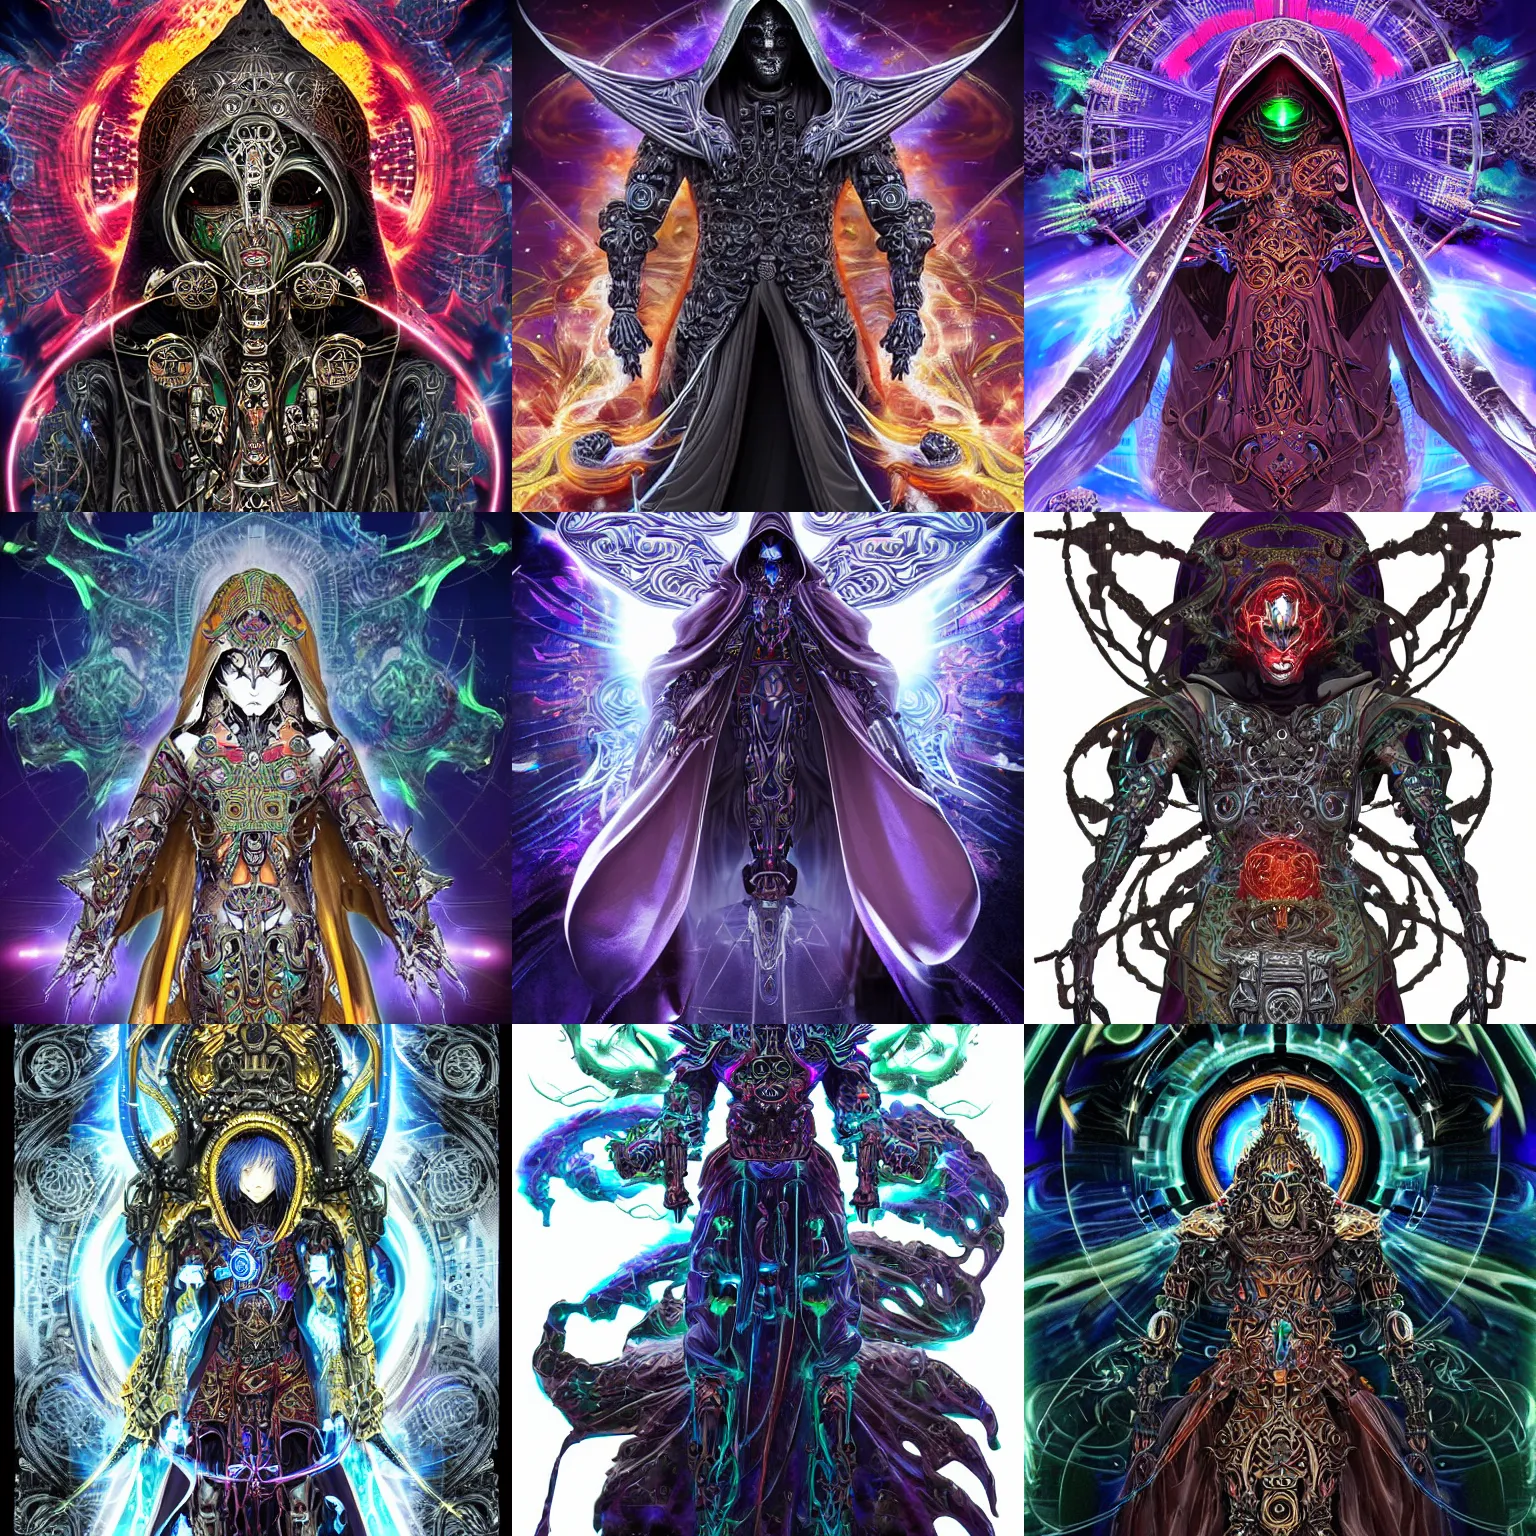 Prompt: Cloaked hooded dark complex cybernetic biomechanical entity with a human face, intricate ornate anime CGI style, rich colour and detail, powerful unstoppable deity brandishing an iridescent cosmic weapon